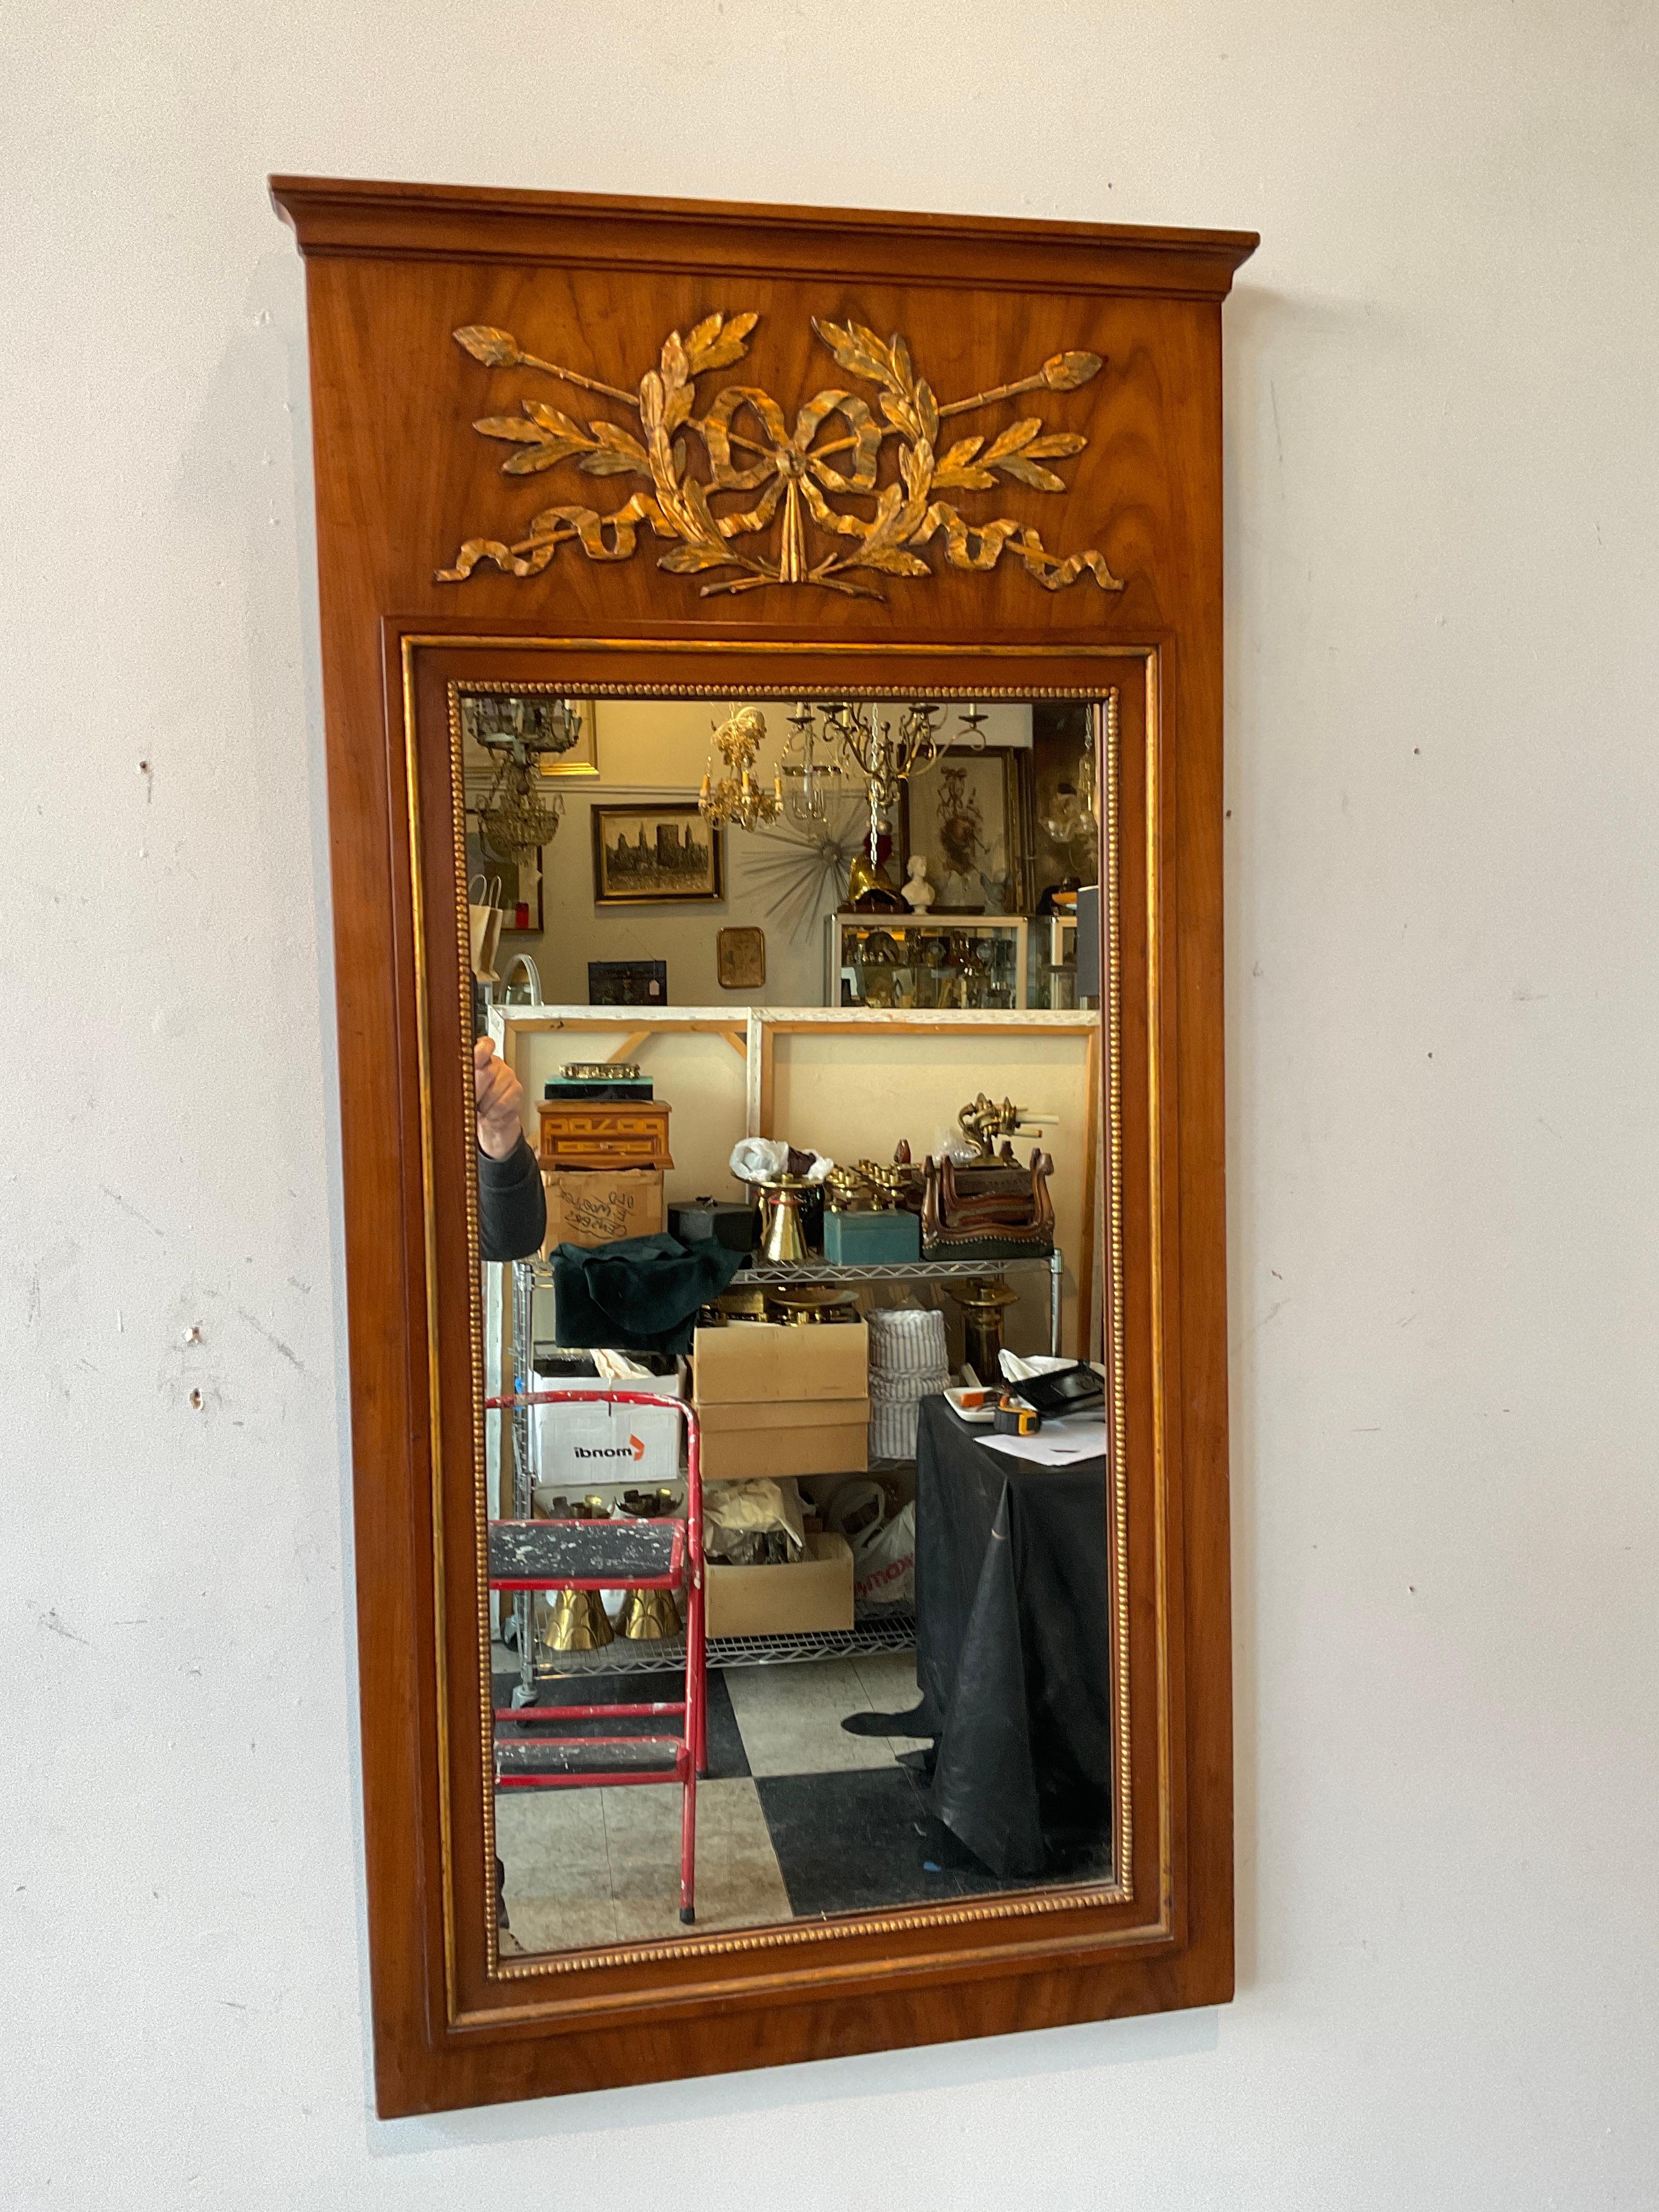 1960s Wood trumeau mirror with gold accents.